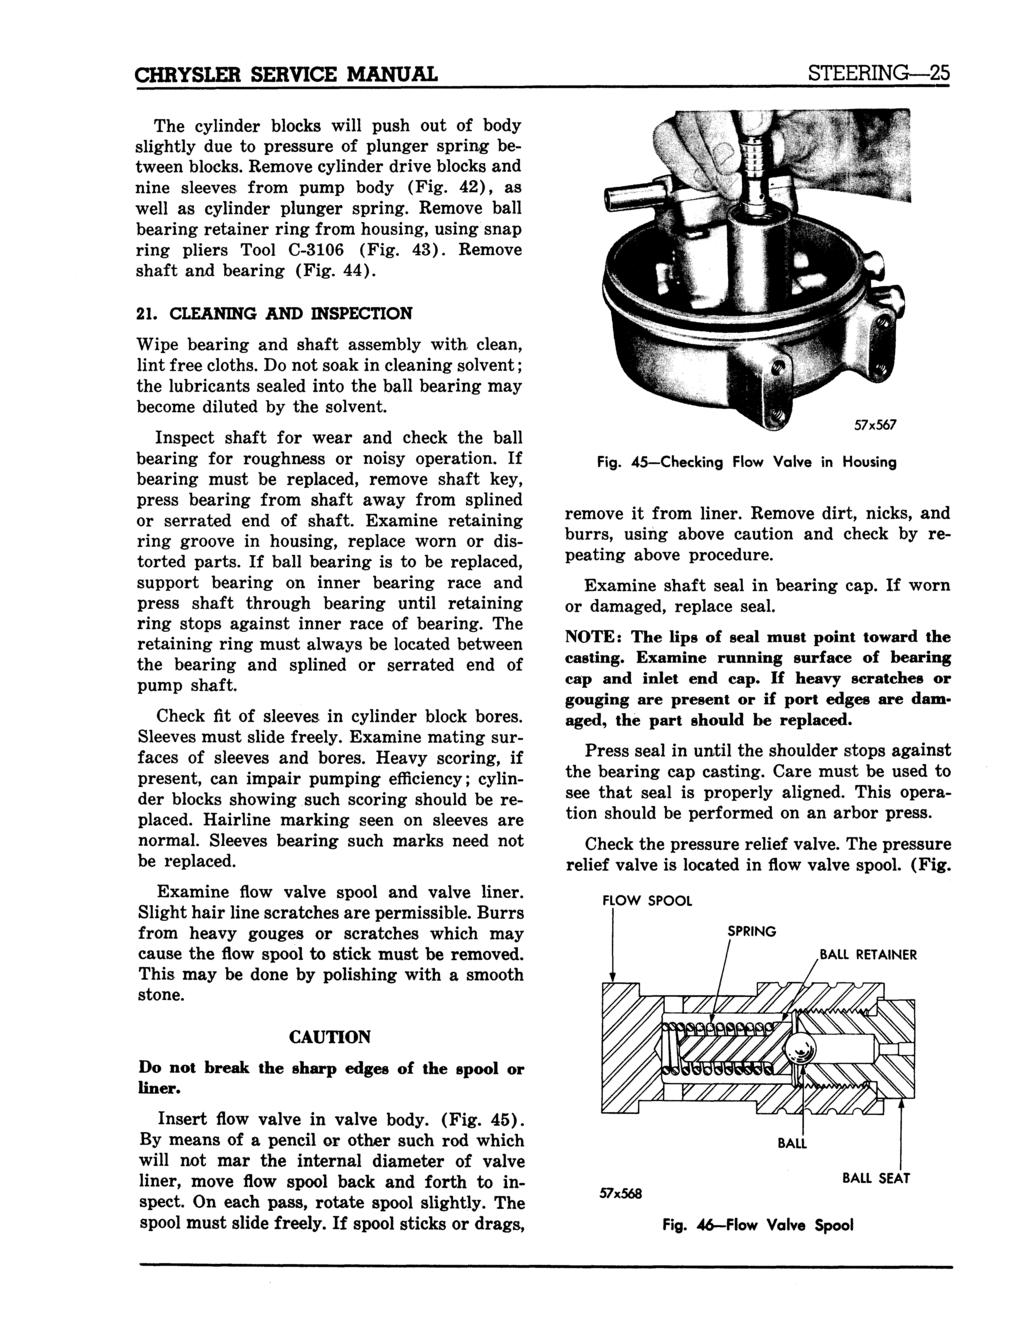 CHRYSLER SERVICE MANUAL STEERING 25 The cylinder blocks will push out of body slightly due to pressure of plunger spring between blocks.